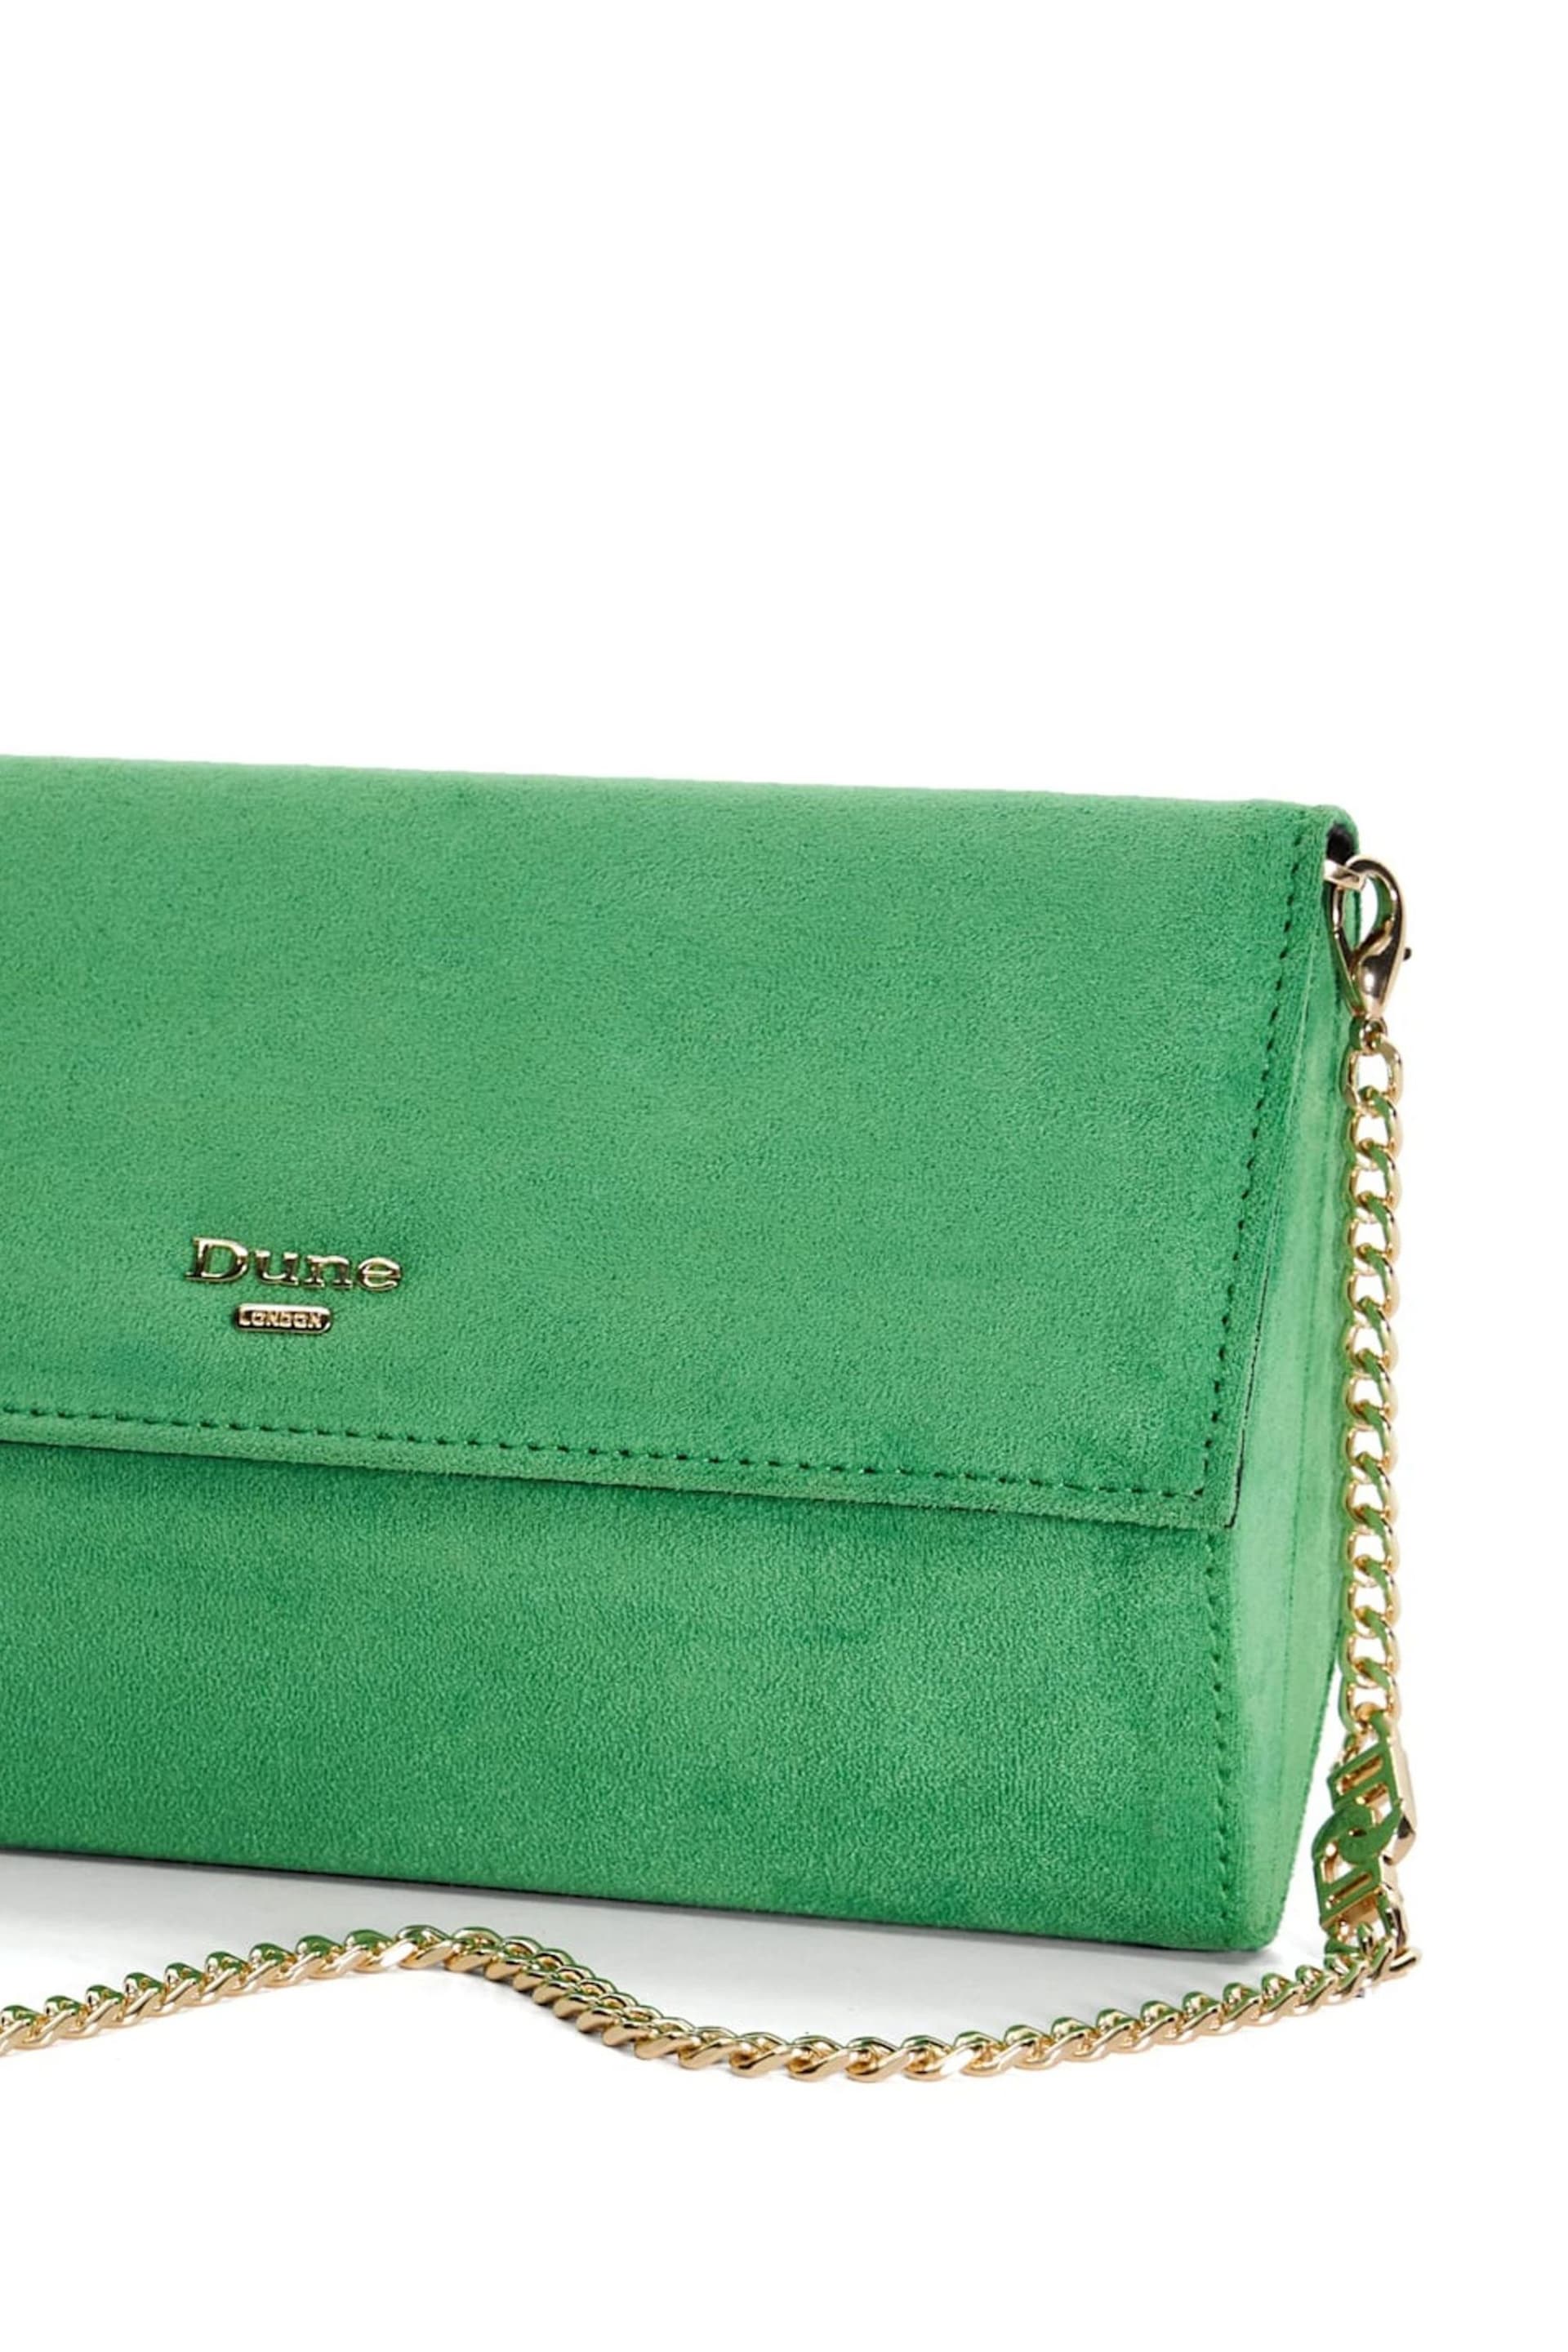 Dune London Green Ballads Structured Foldover Clutch Bag - Image 6 of 6